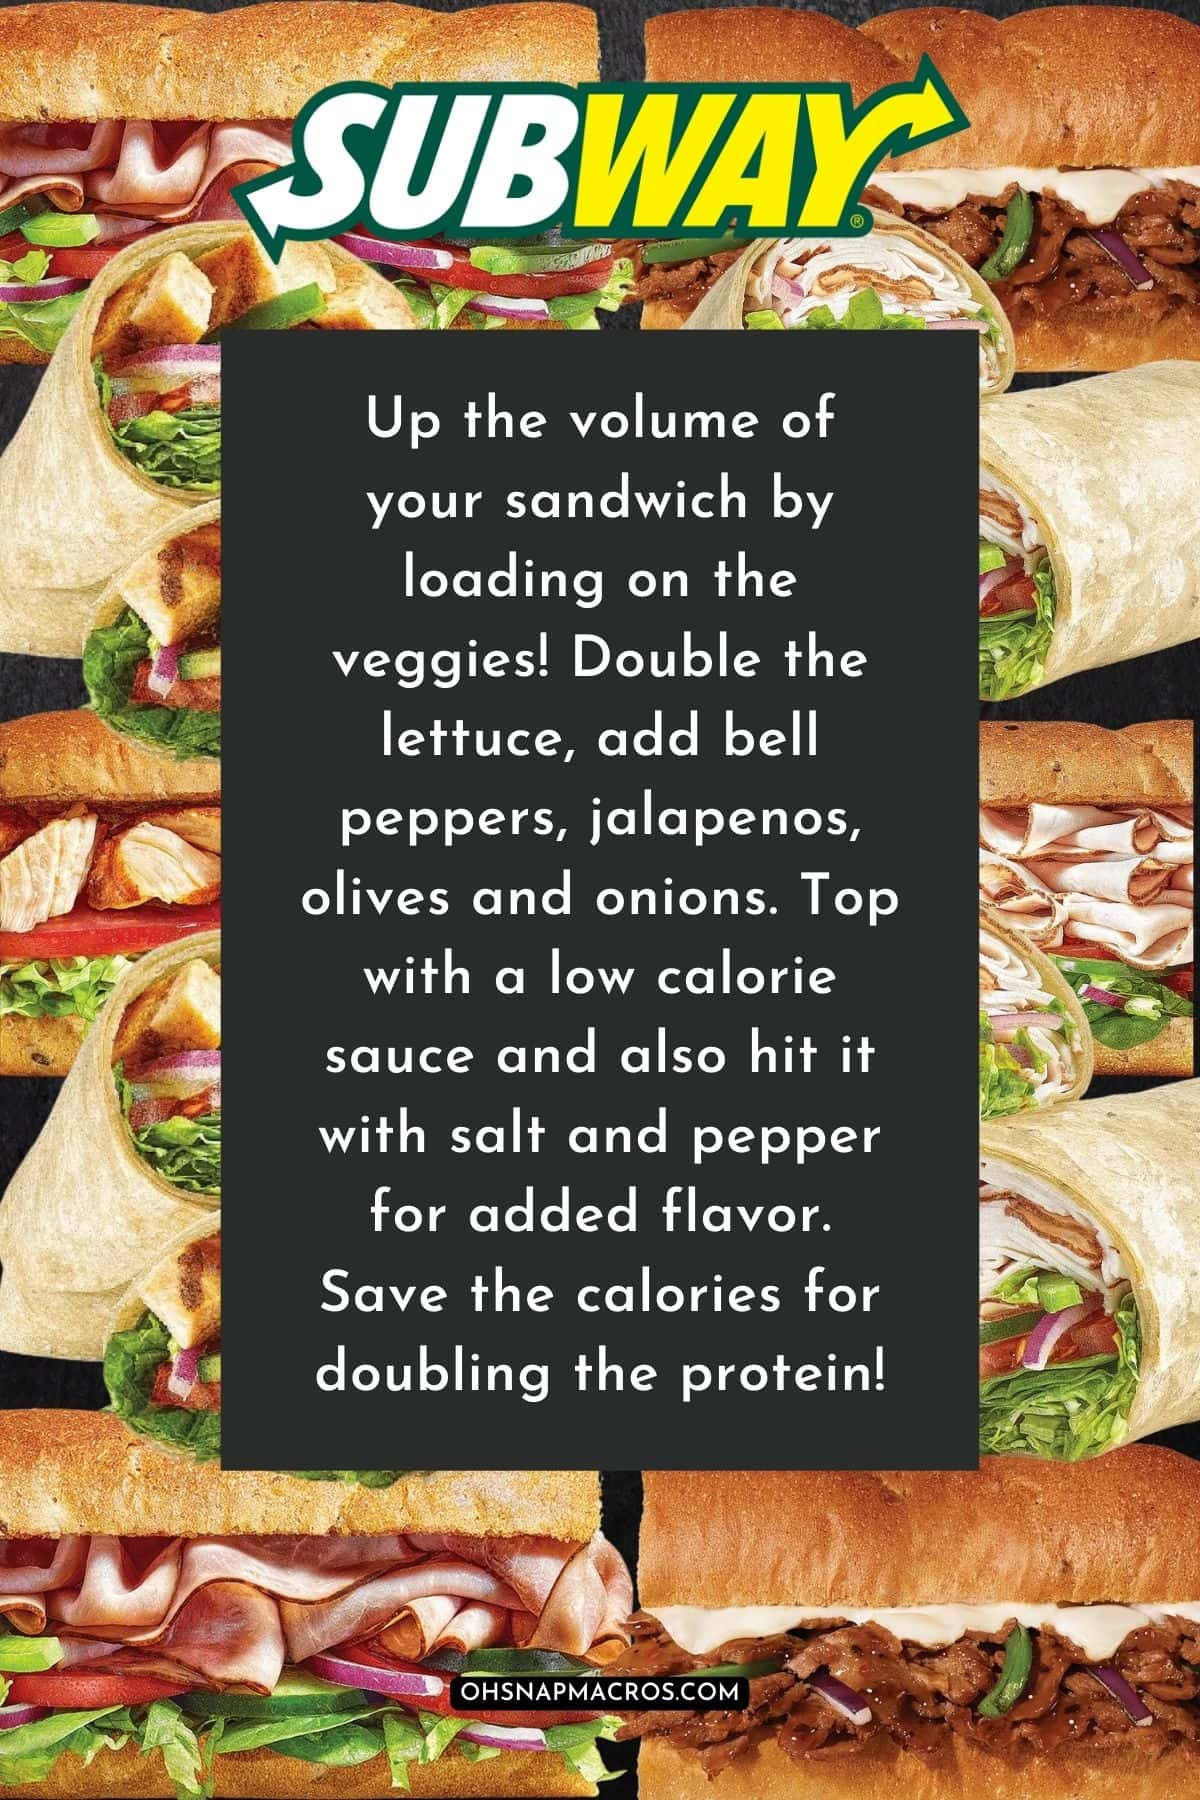 Text recommending to load up on the veggies and add low calorie sauce.